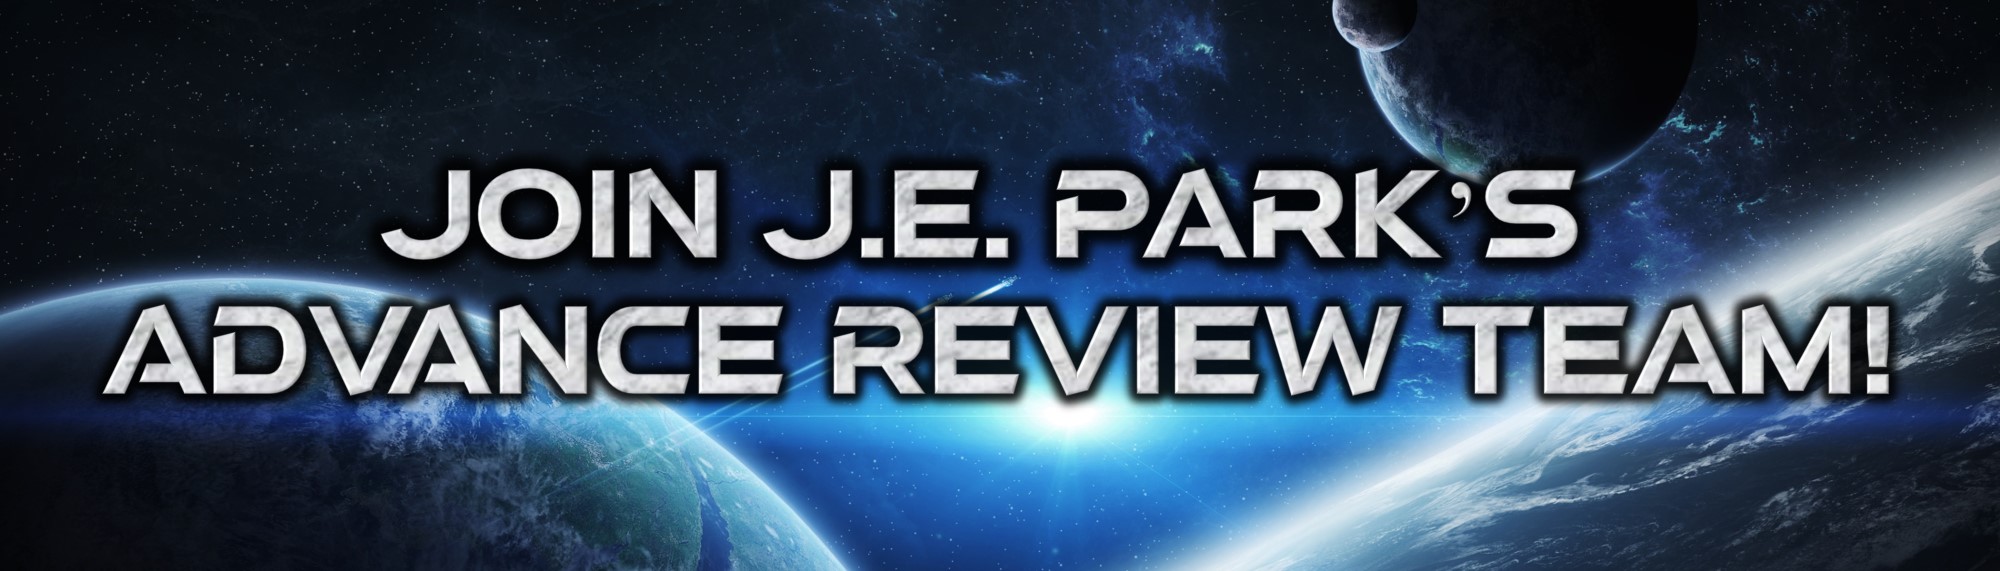 JOIN THE J.E. Park advance review team!